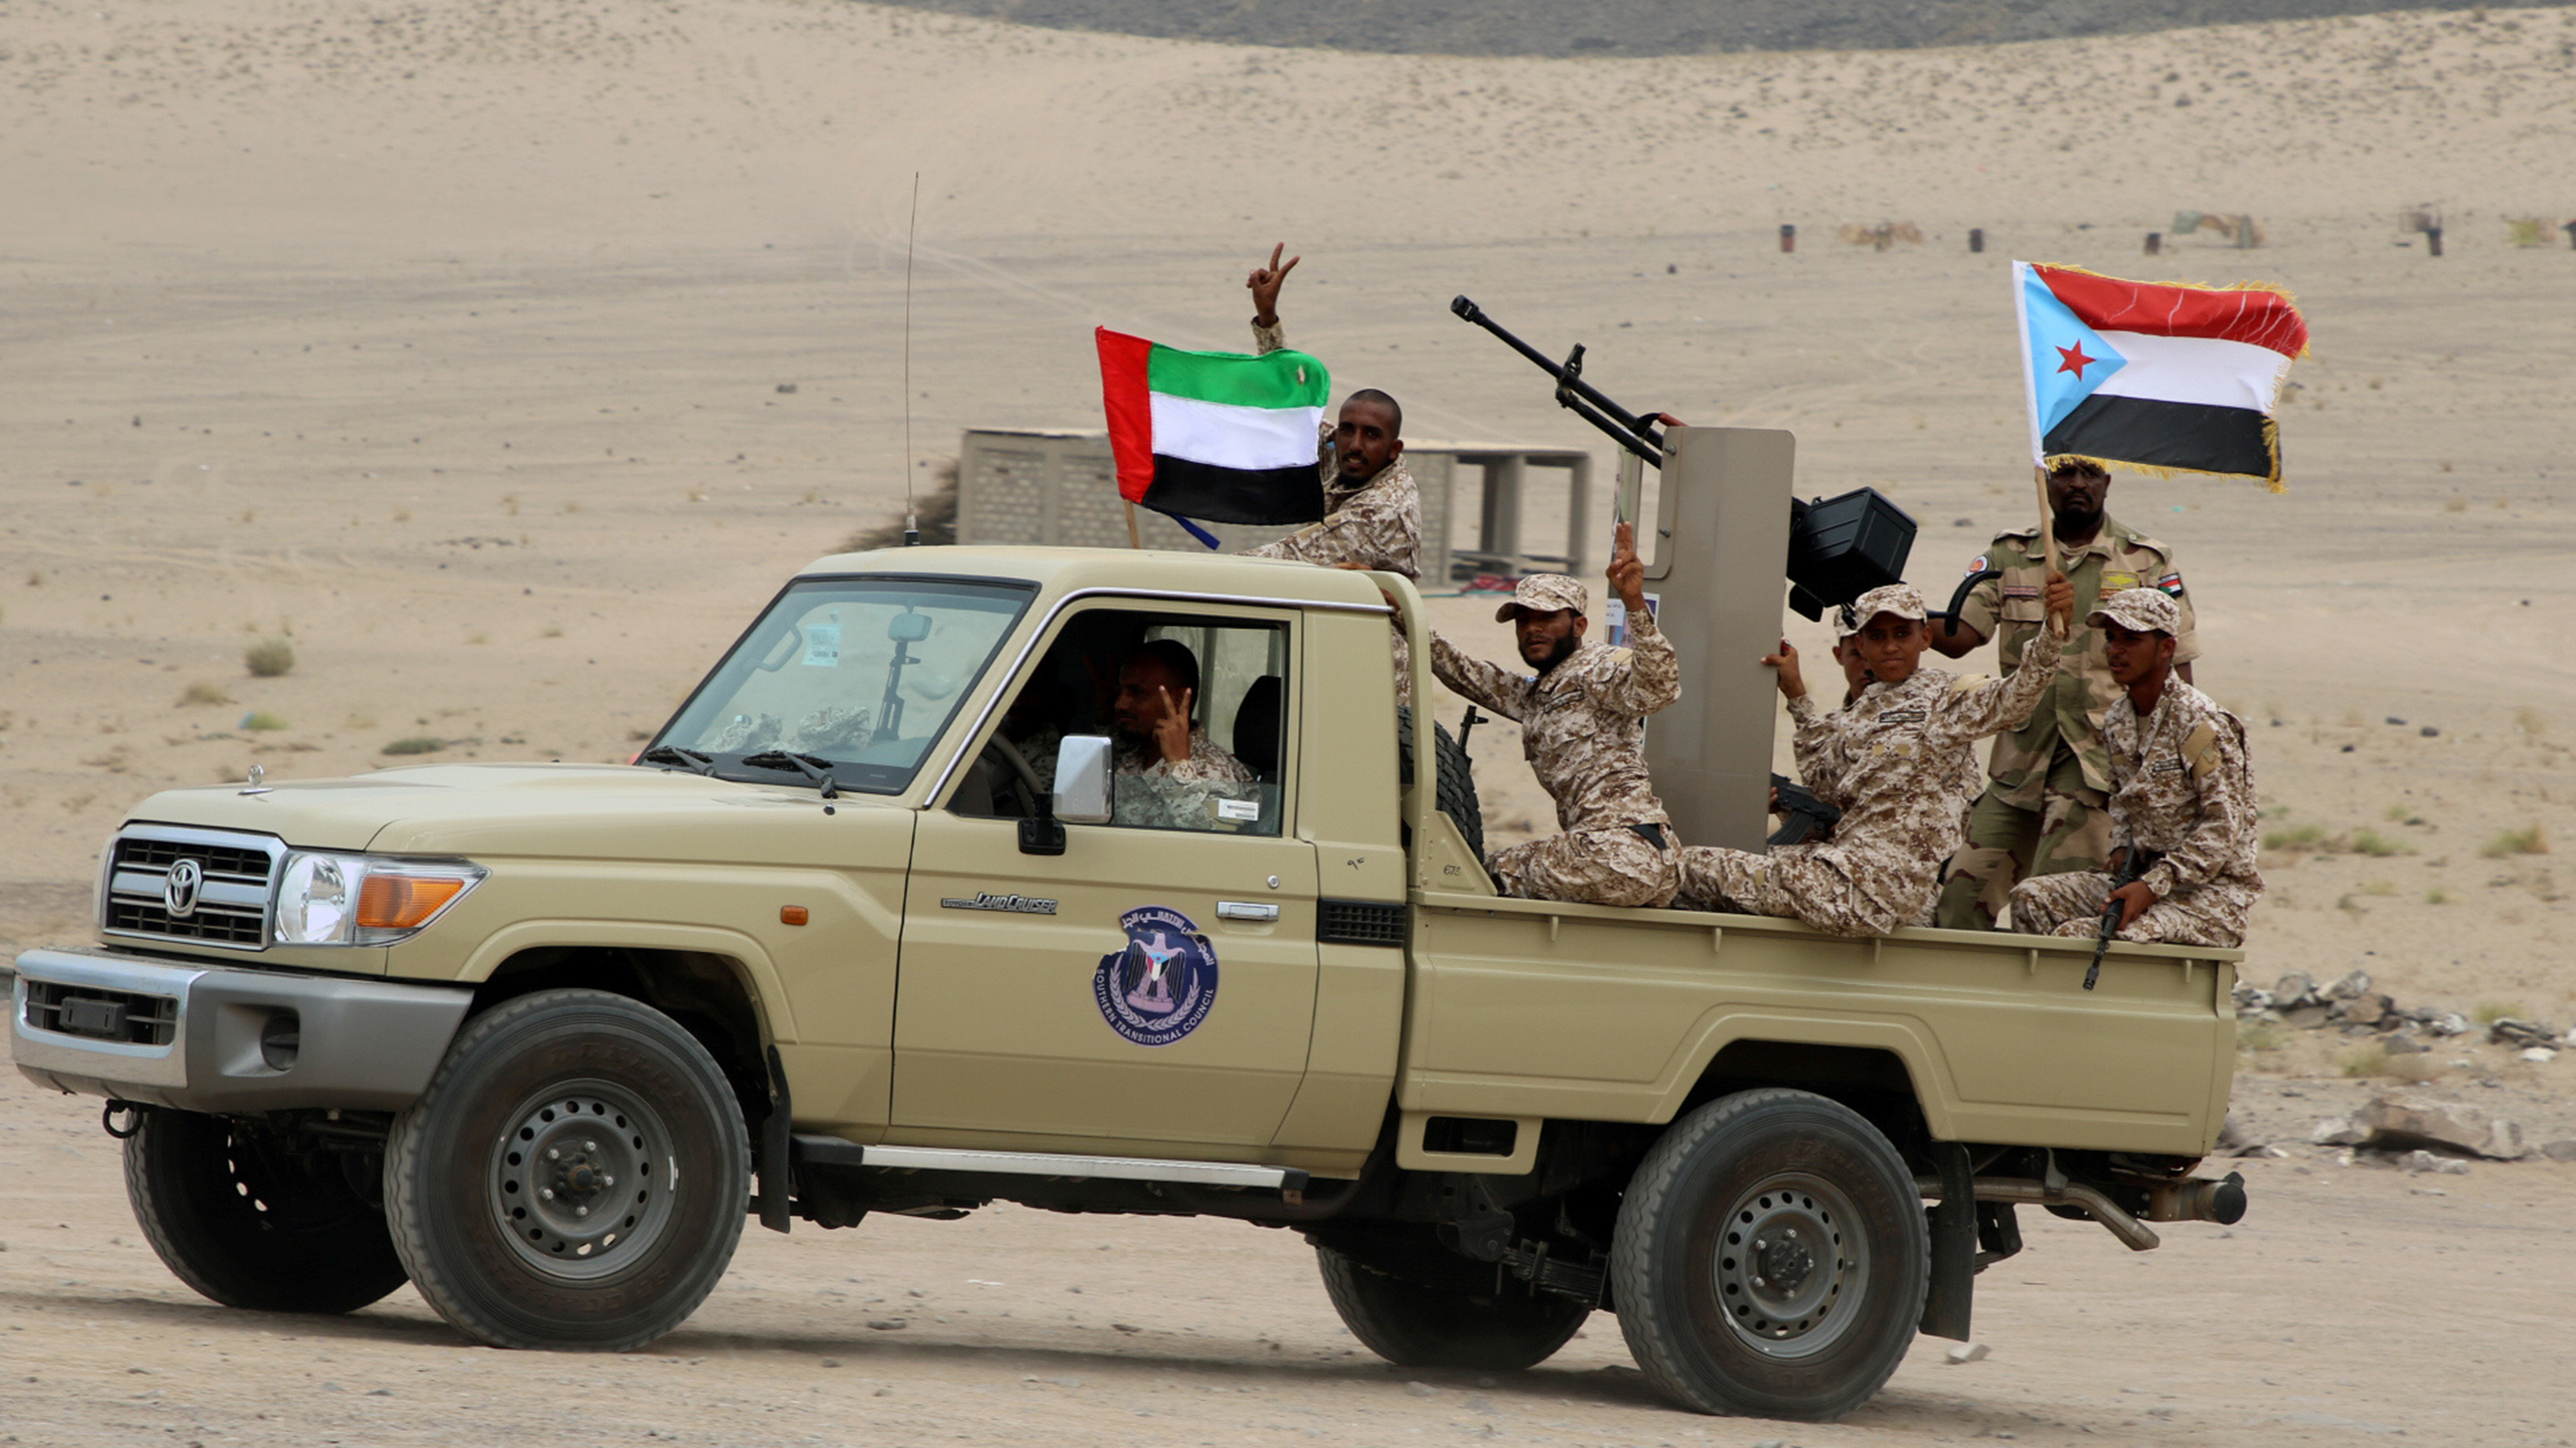 UAE-Backed Forces End Offensive In Central Yemen Following Threats By Houthis (Video)